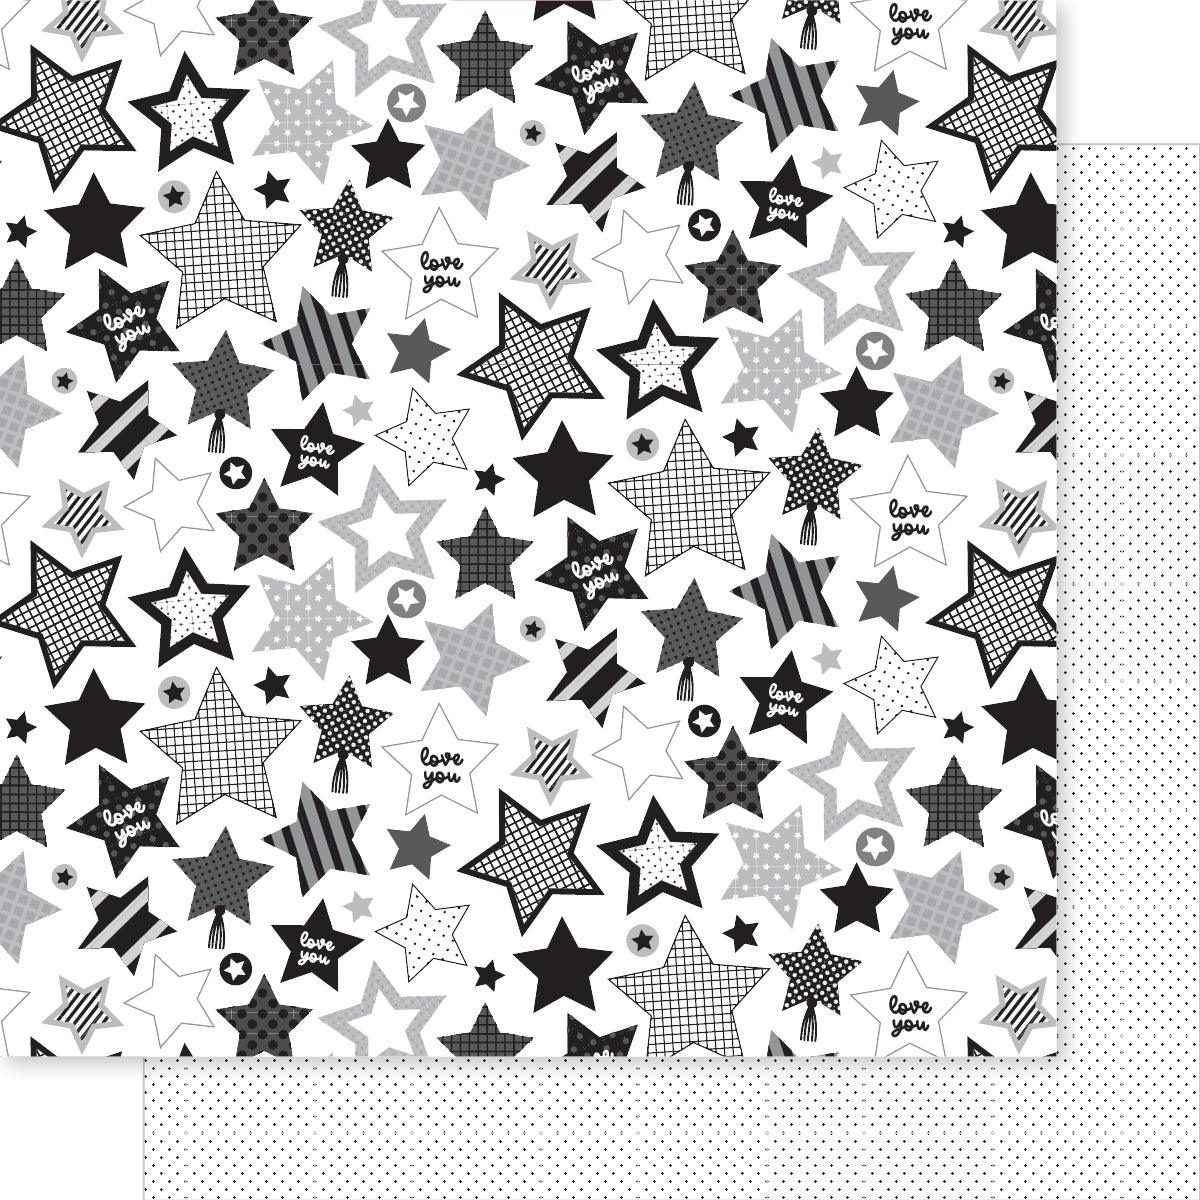 Cap & Gown Collection Reach For The Stars 12 x 12 Double-Sided Scrapbook Paper by Doodlebug Design - Scrapbook Supply Companies